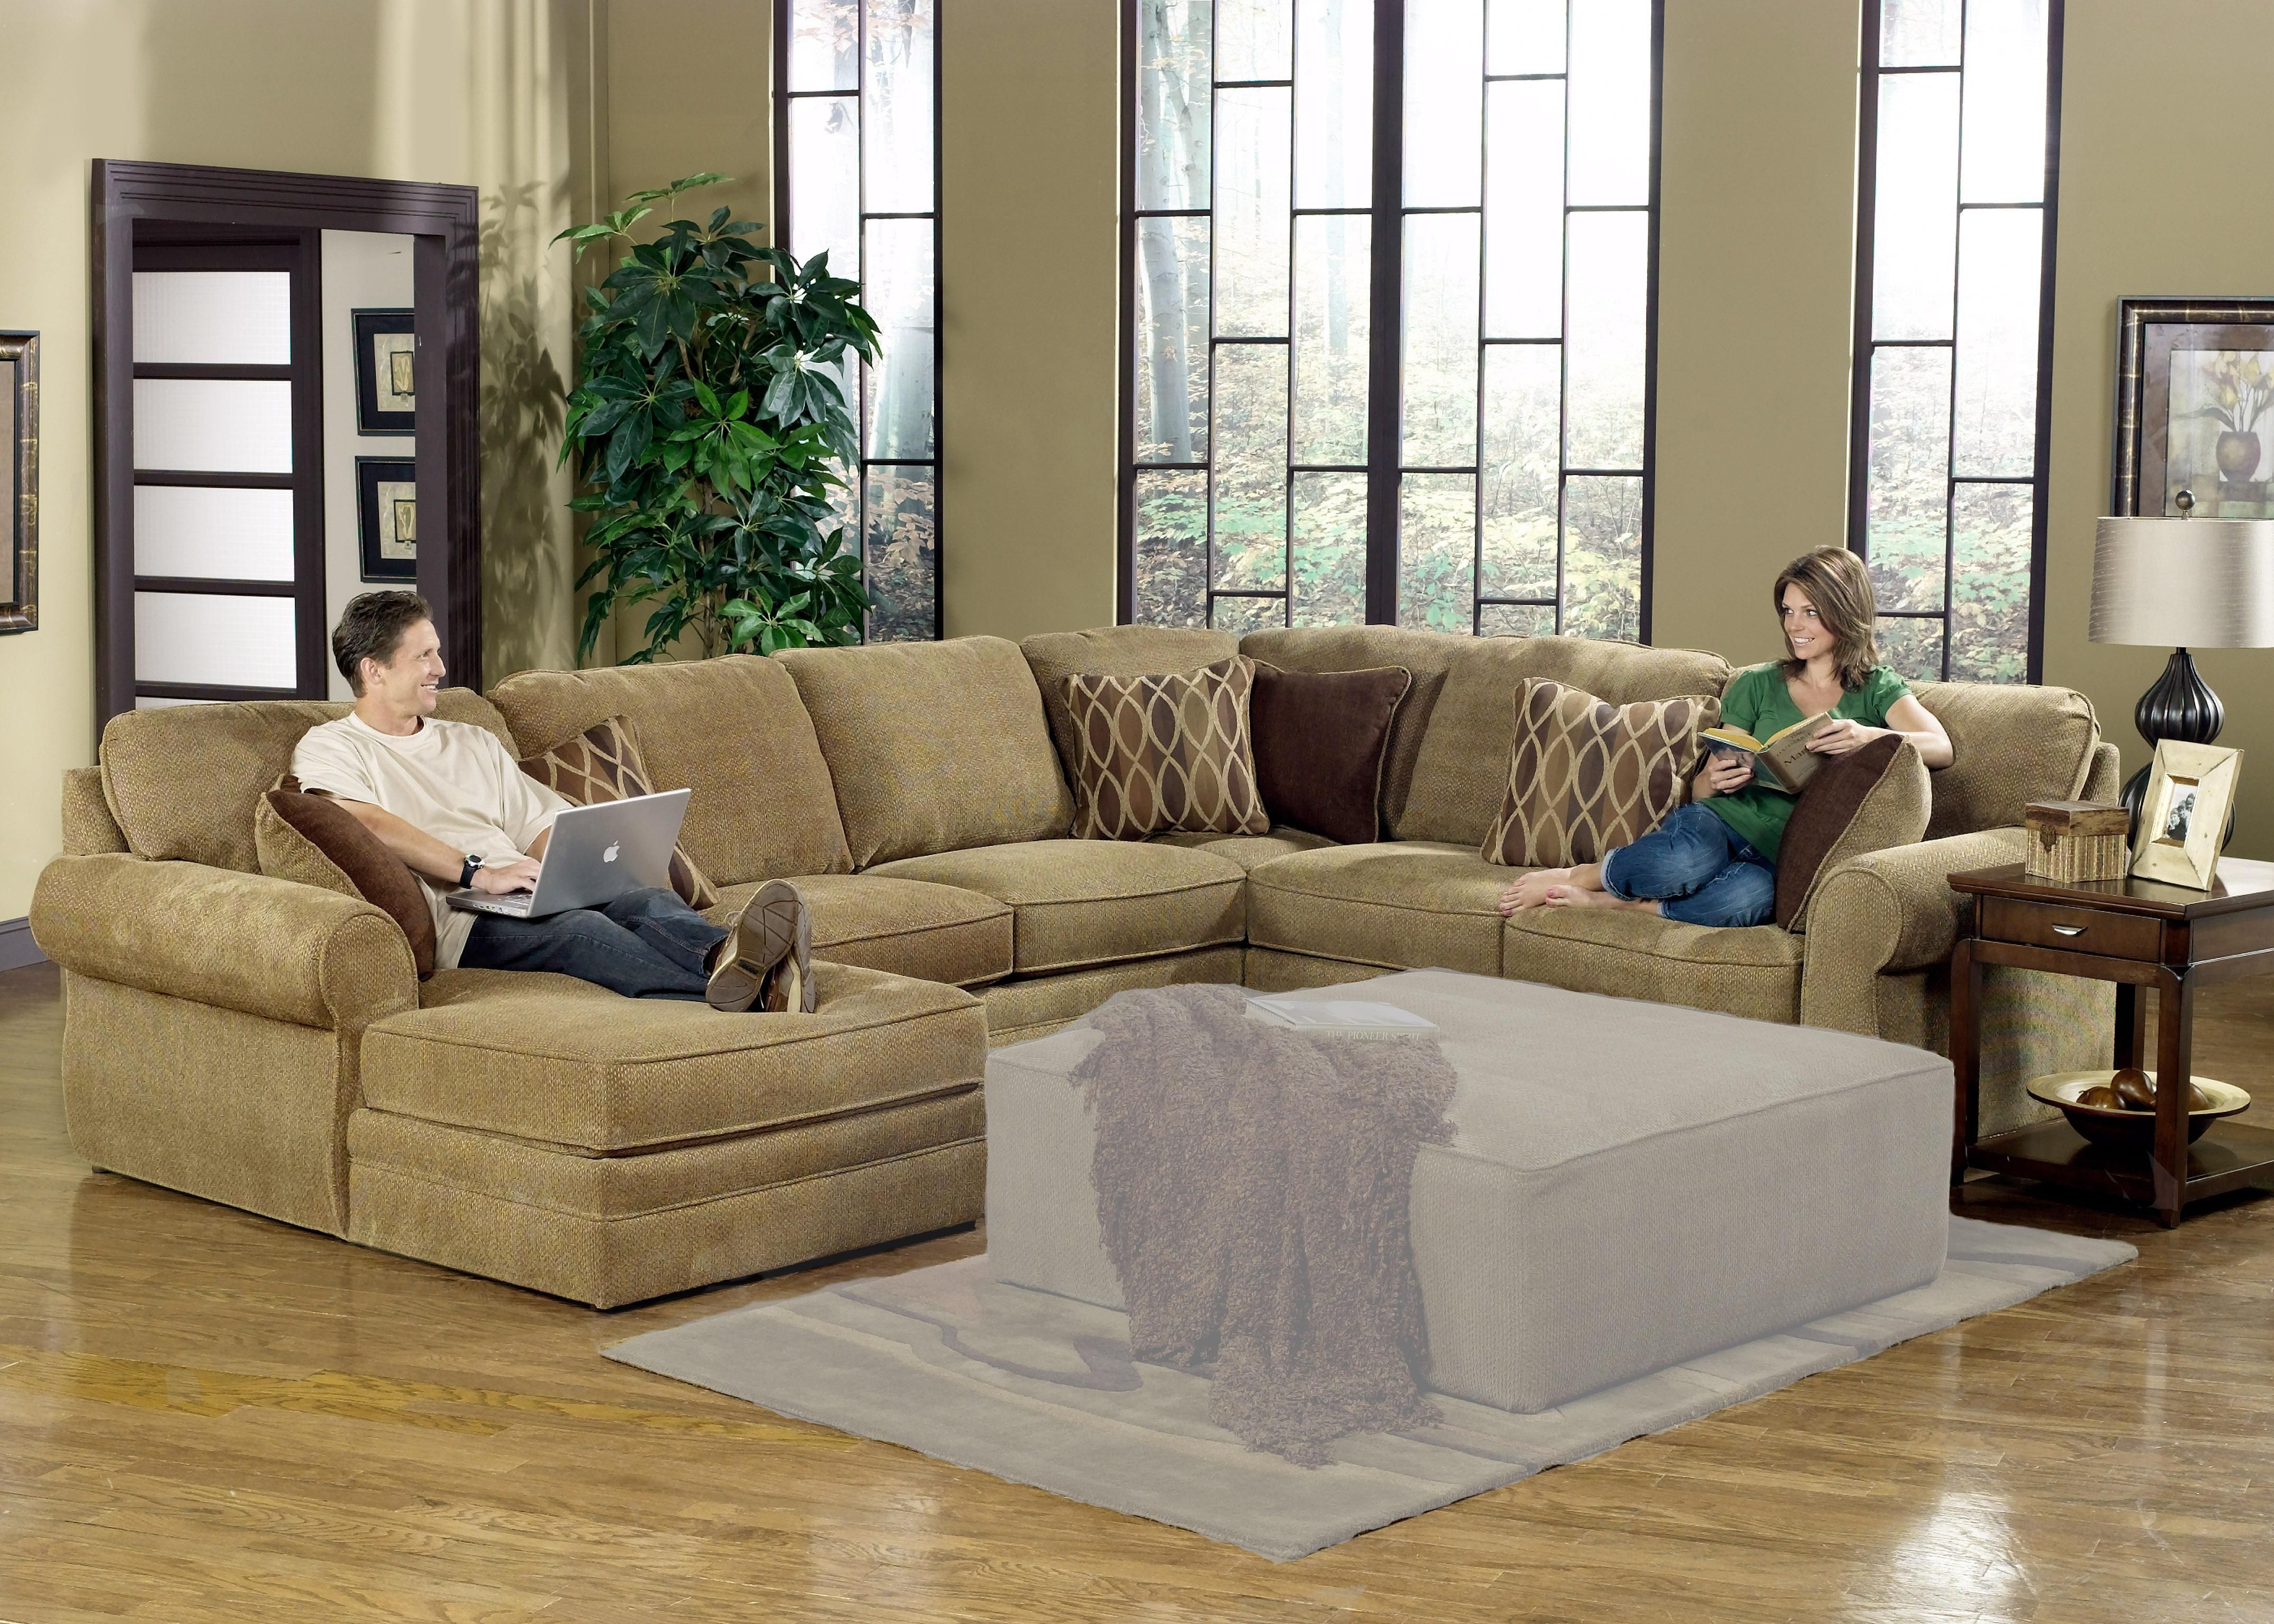 Fascinating U Shaped Sectional Sofas 123 Sofa Sectionals Canada Intended For Ontario Canada Sectional Sofas (View 4 of 10)